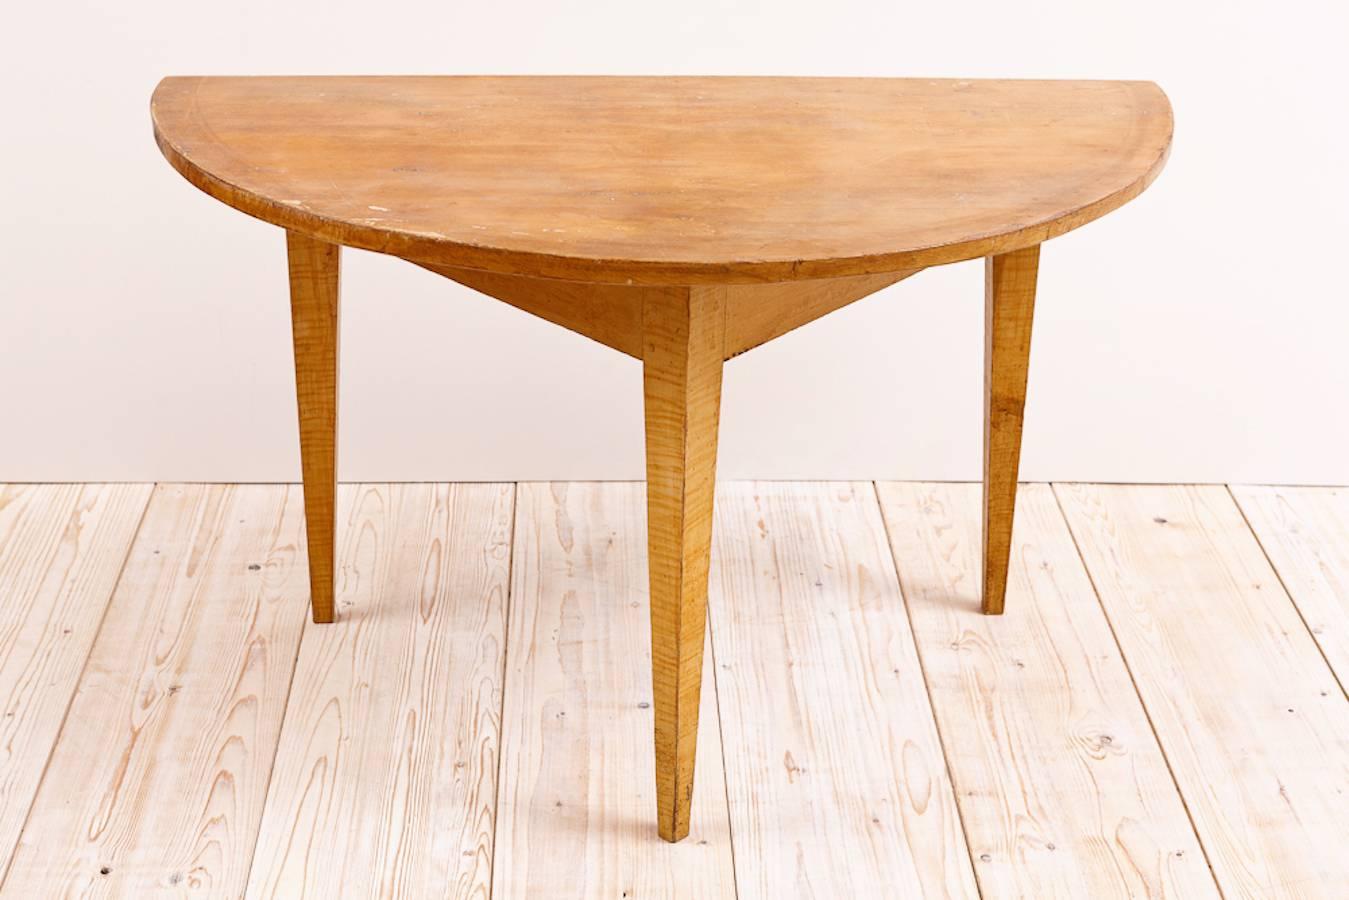 A pair of Gustavian tables with demilune top over square tapered legs in pine with original faux bois finish, Sweden, circa 1790. They make wonderful end tables, nightstands, or foyer tables!
Note: You should always request a shipping quote.
Quoted